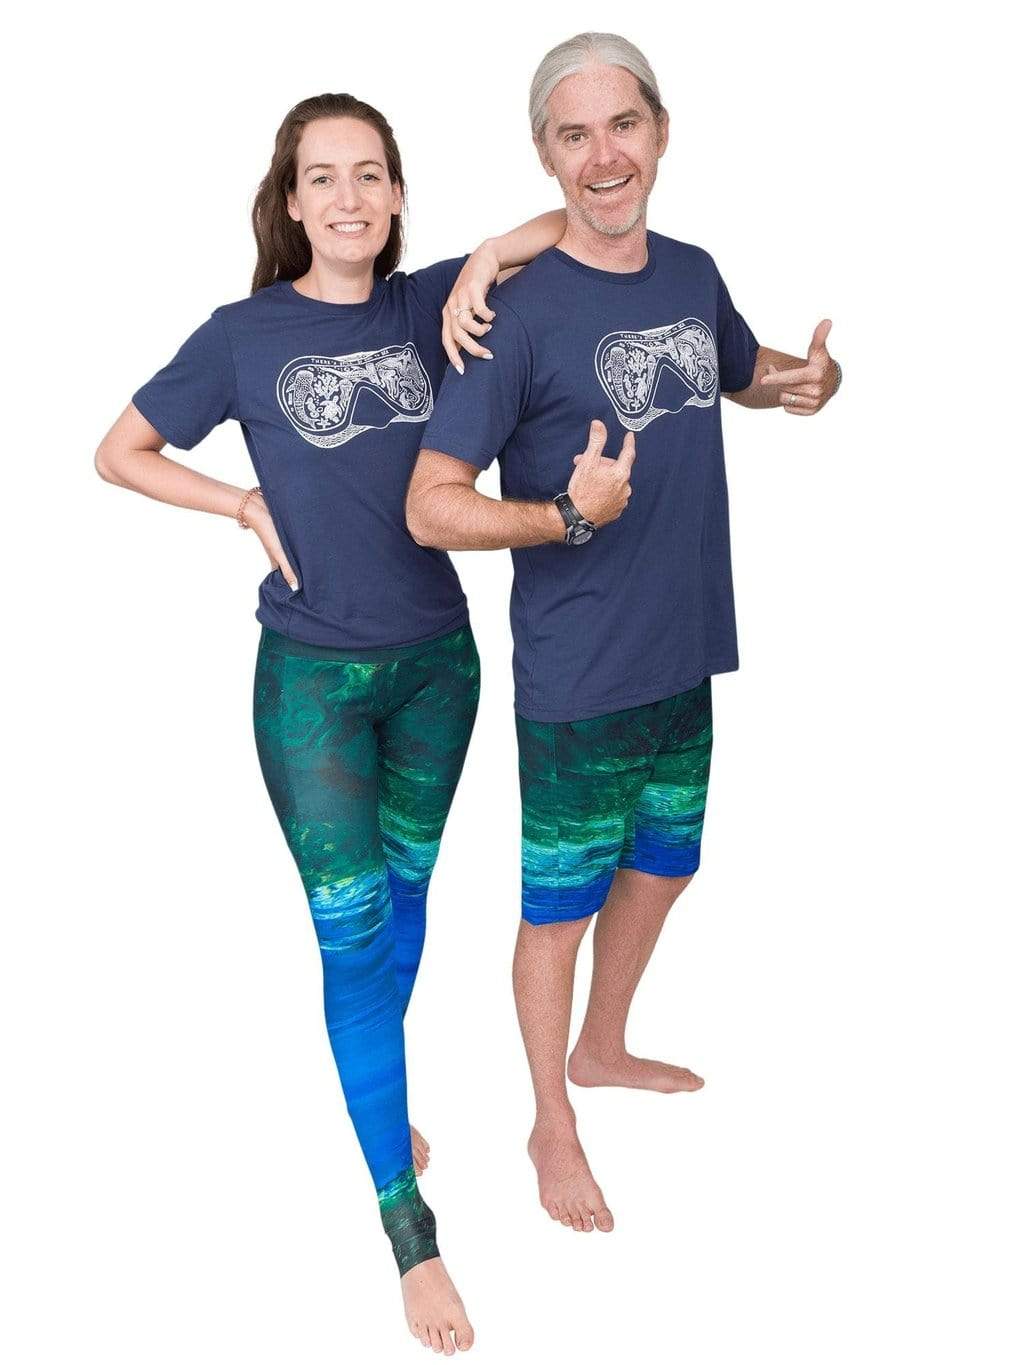 Model: Laura is our Director of Apparel here at Waterlust. She is 5’10, 147 lbs and is wearing a size S. Patrick is our Founder and CEO, he is 6&#39;1, 175 lbs and is wearing a size L.